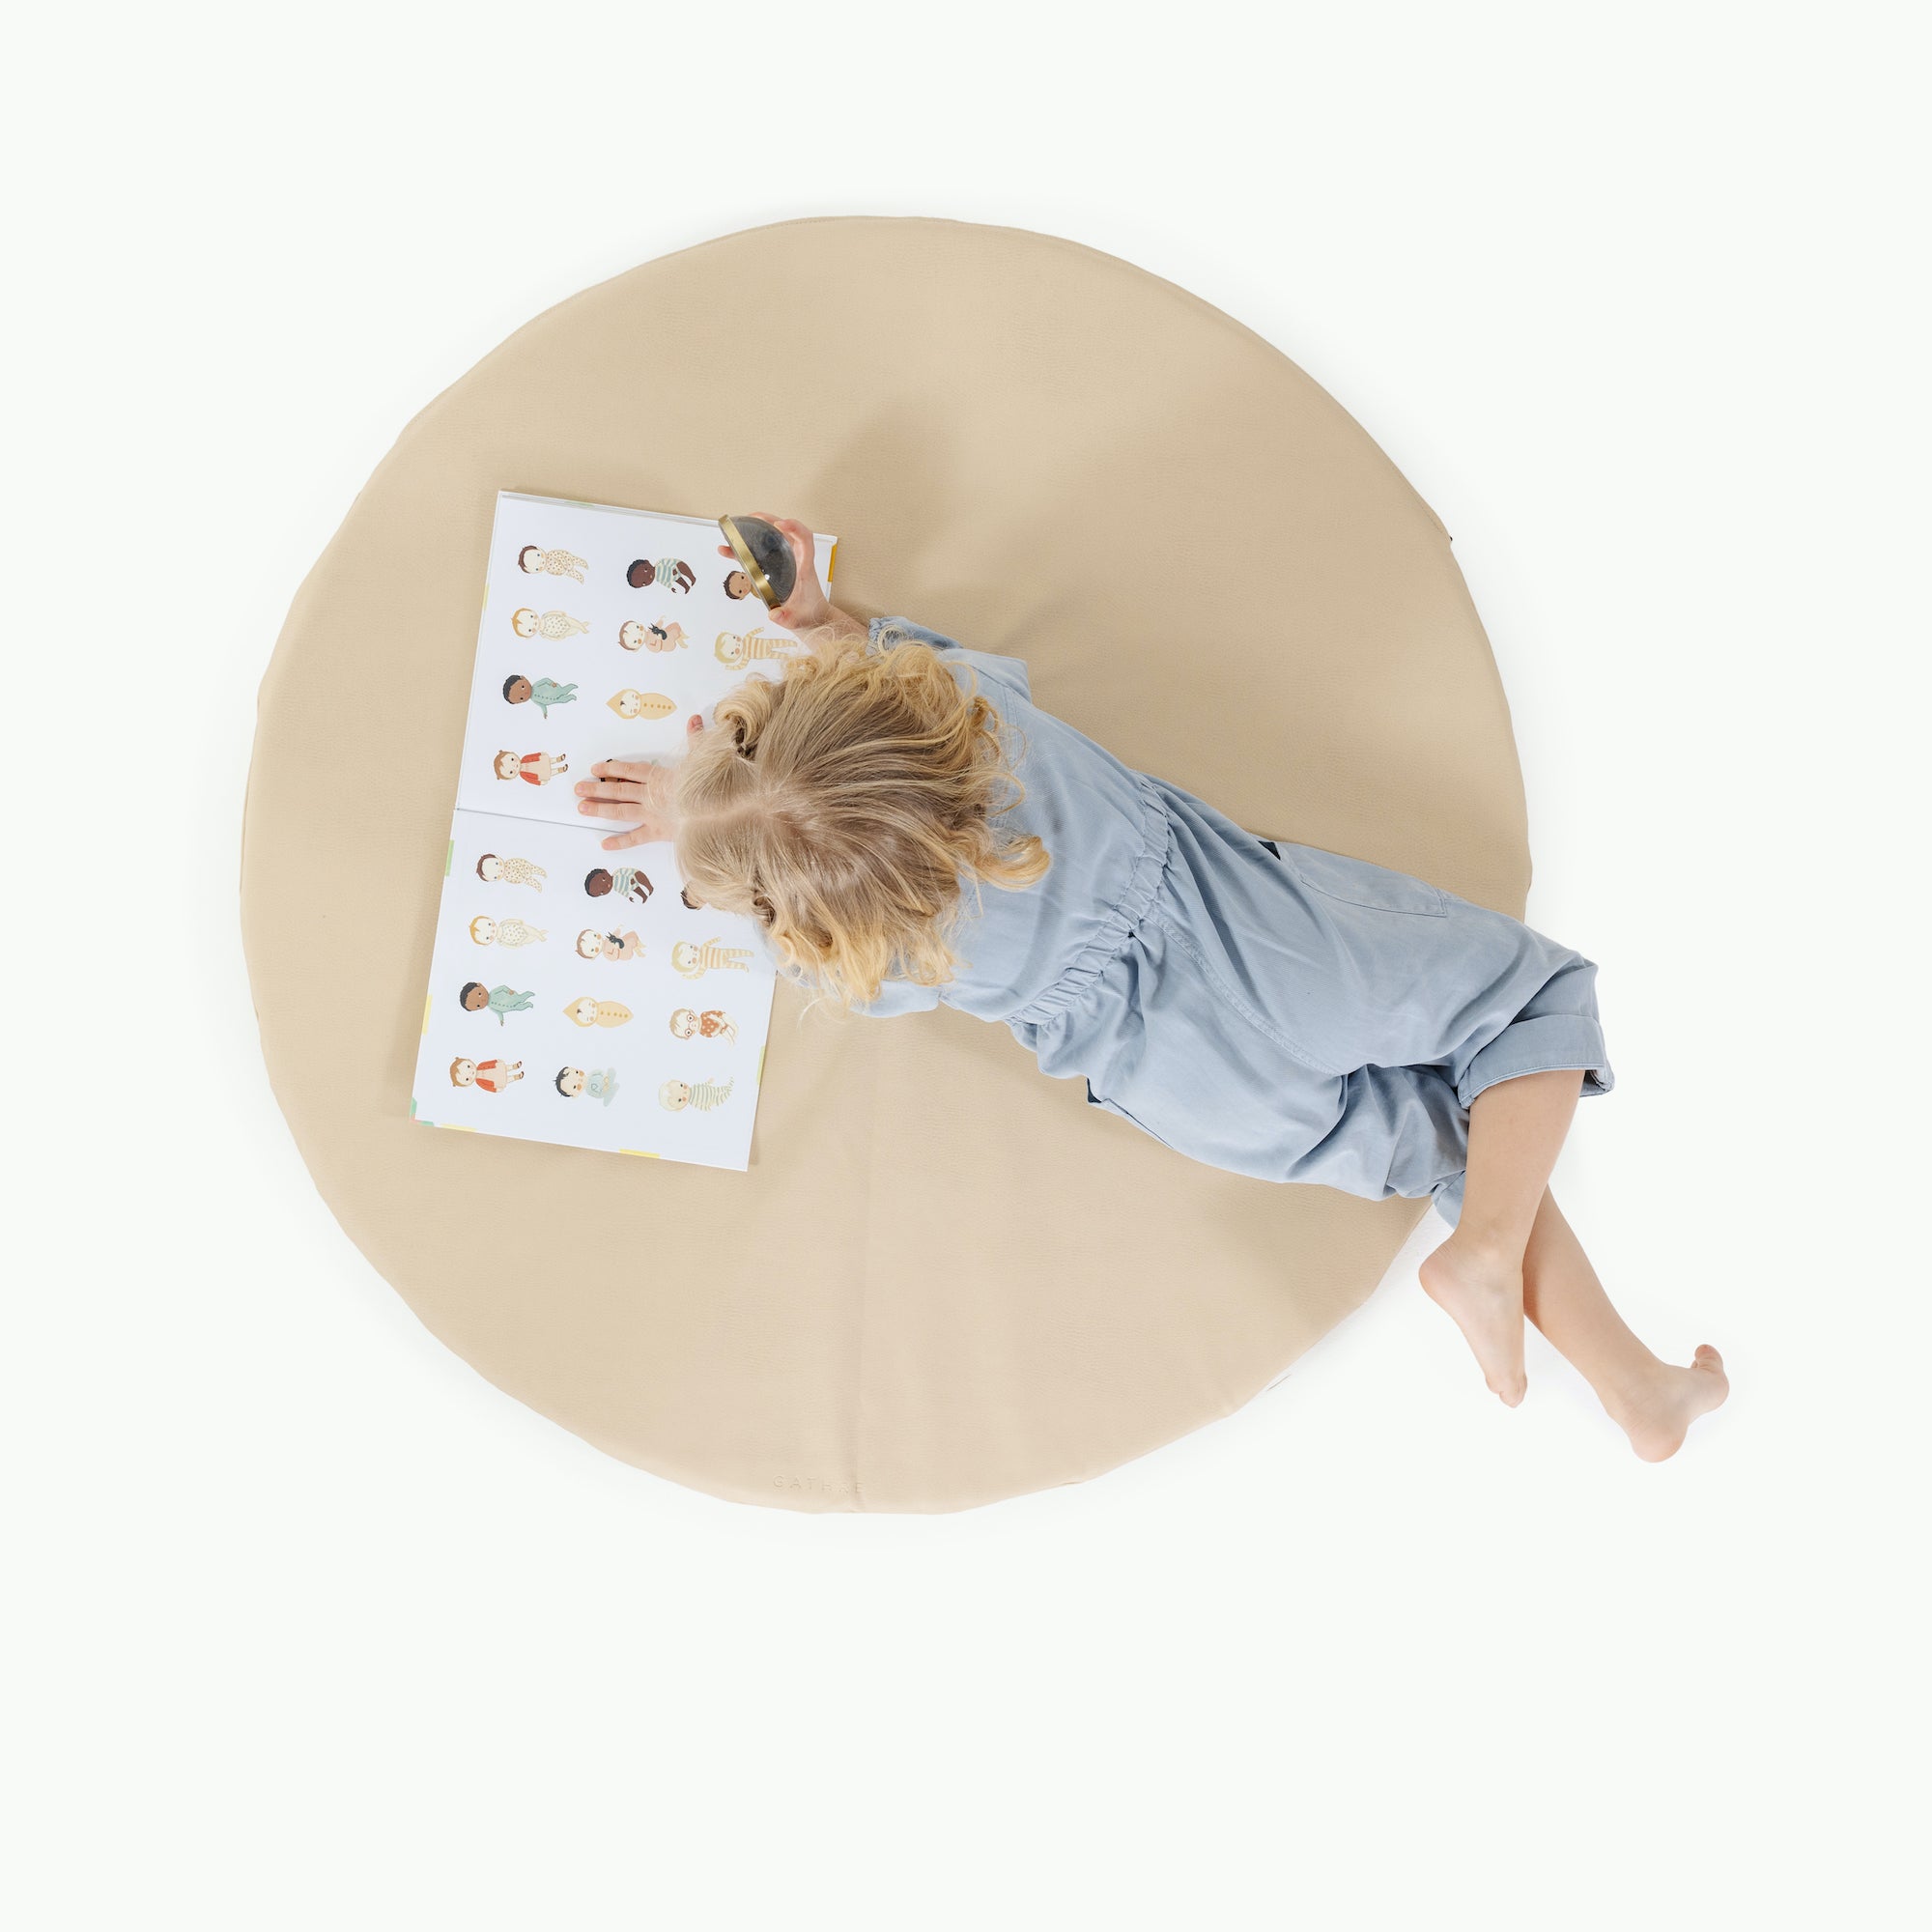 Créme / Circle@overhead of little girl playing on padded mat